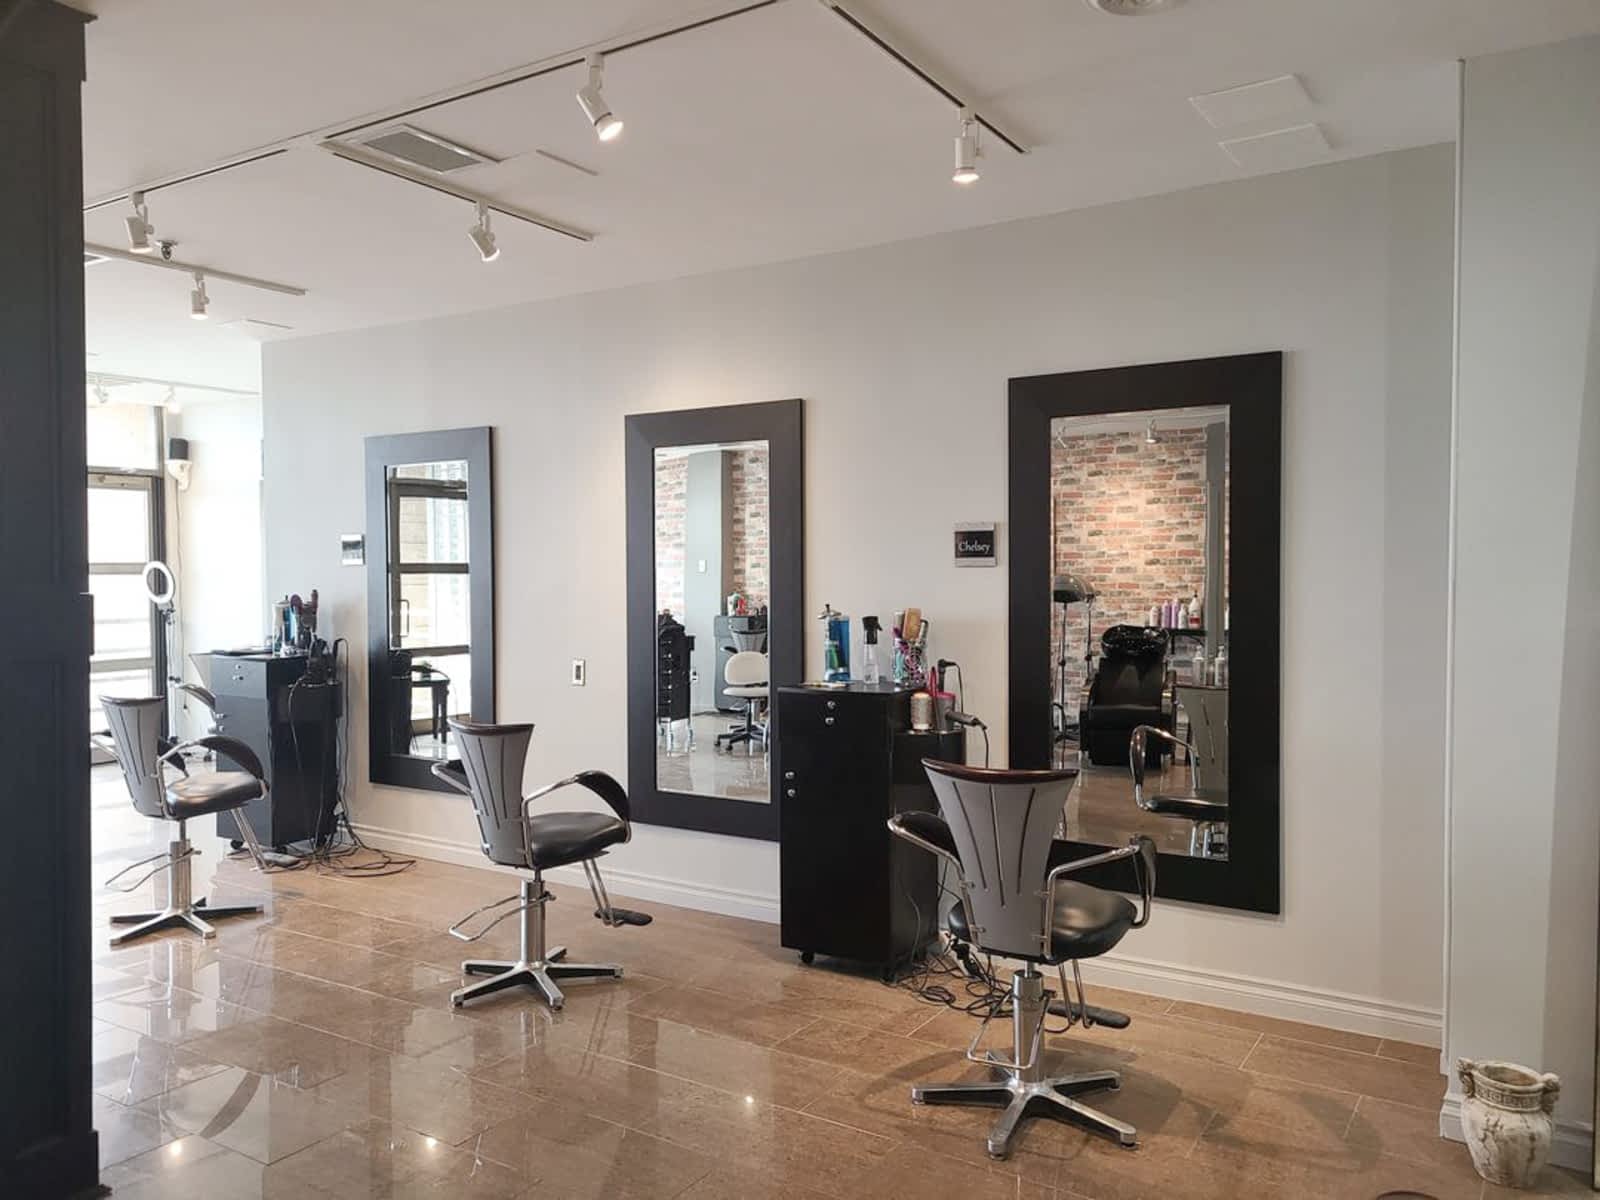 Samson's Salon And Spa - Opening Hours - Dunlop Street East, Barrie, ON